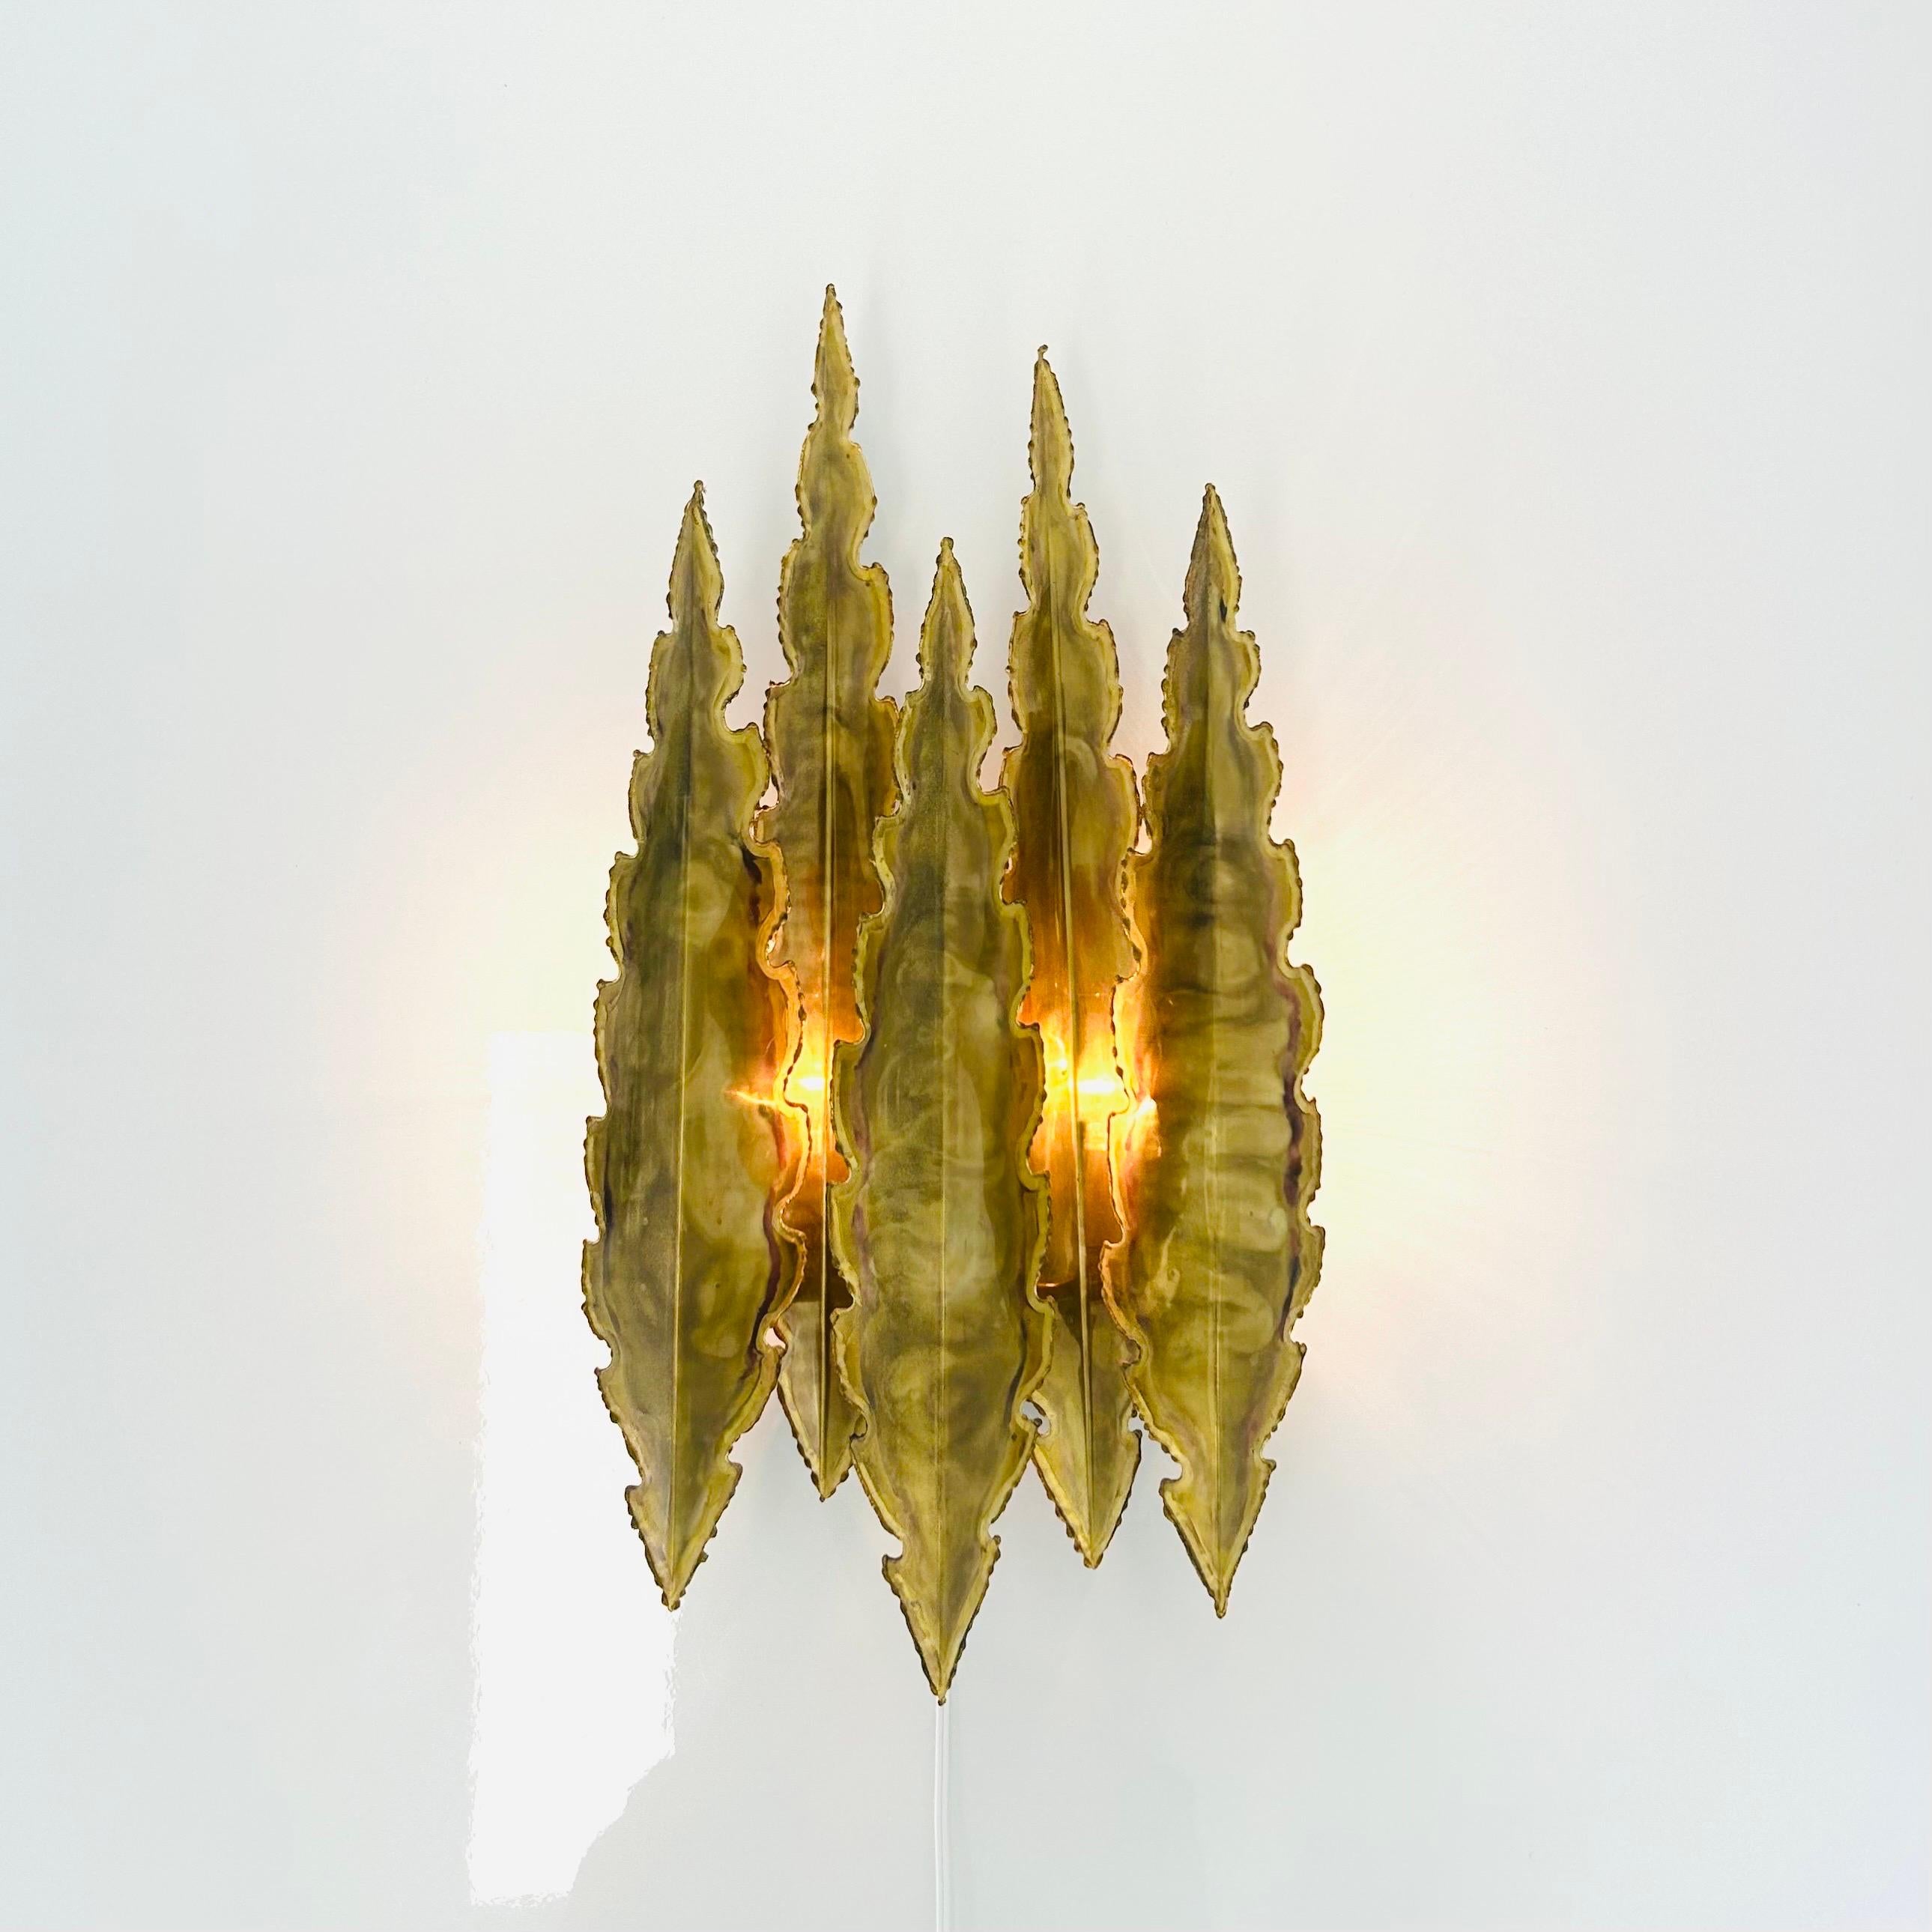 Mid-20th Century Pair of Large Brass Wall Lamps by Svend Aage Holm Sorensen, 1960s, Denmark